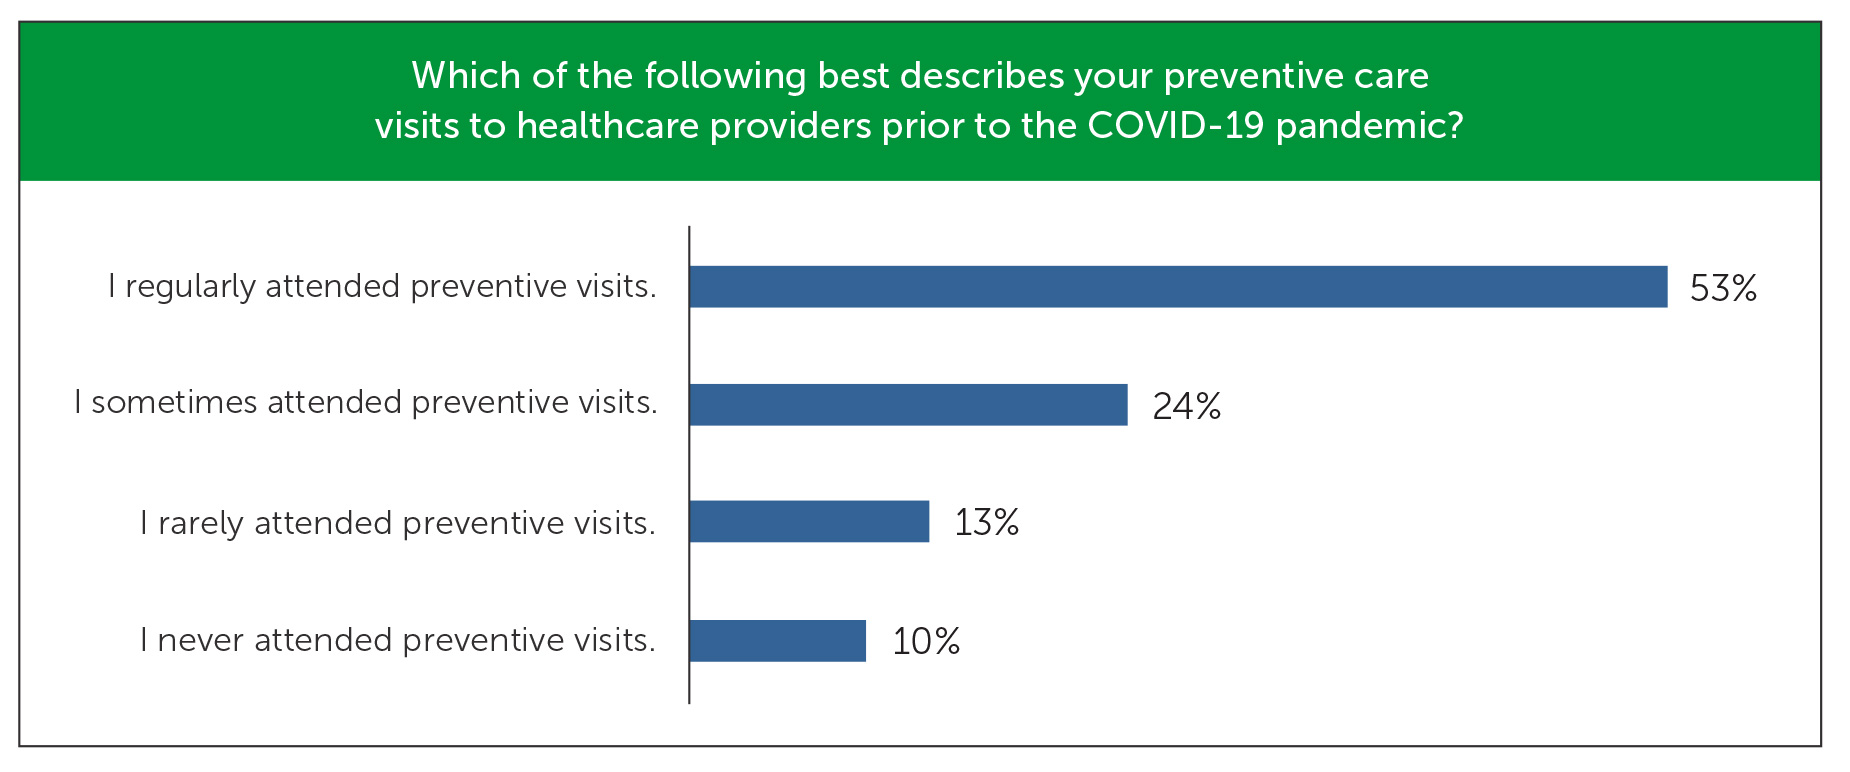 Preventive care visits to healthcare providers prior to COVID-19 pandemic